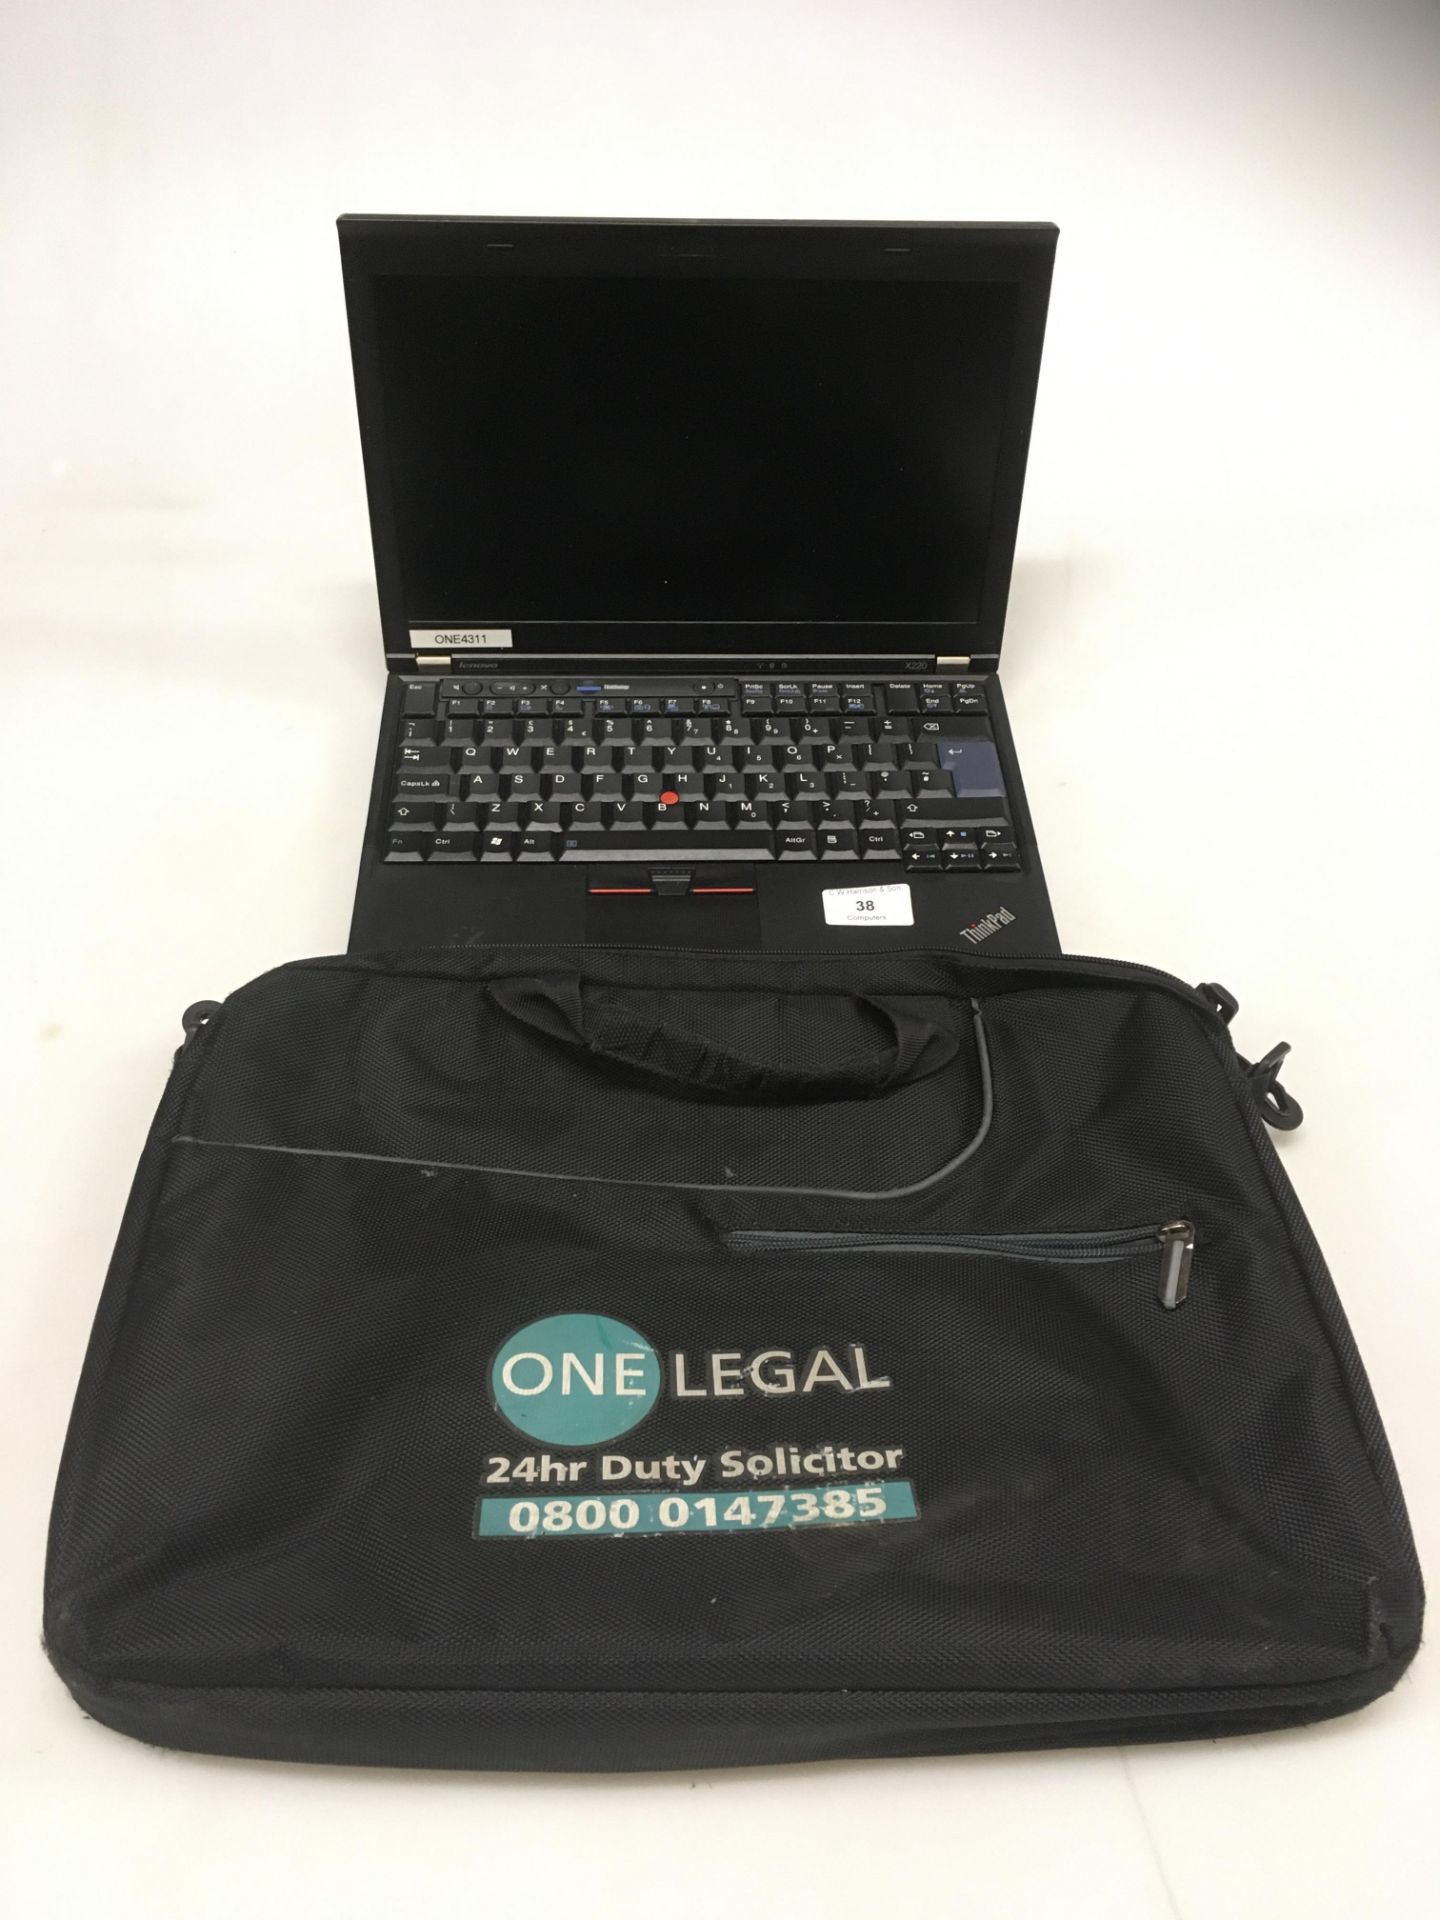 Lenovo X220 laptop computer with power adapter and bag (damage to casing)